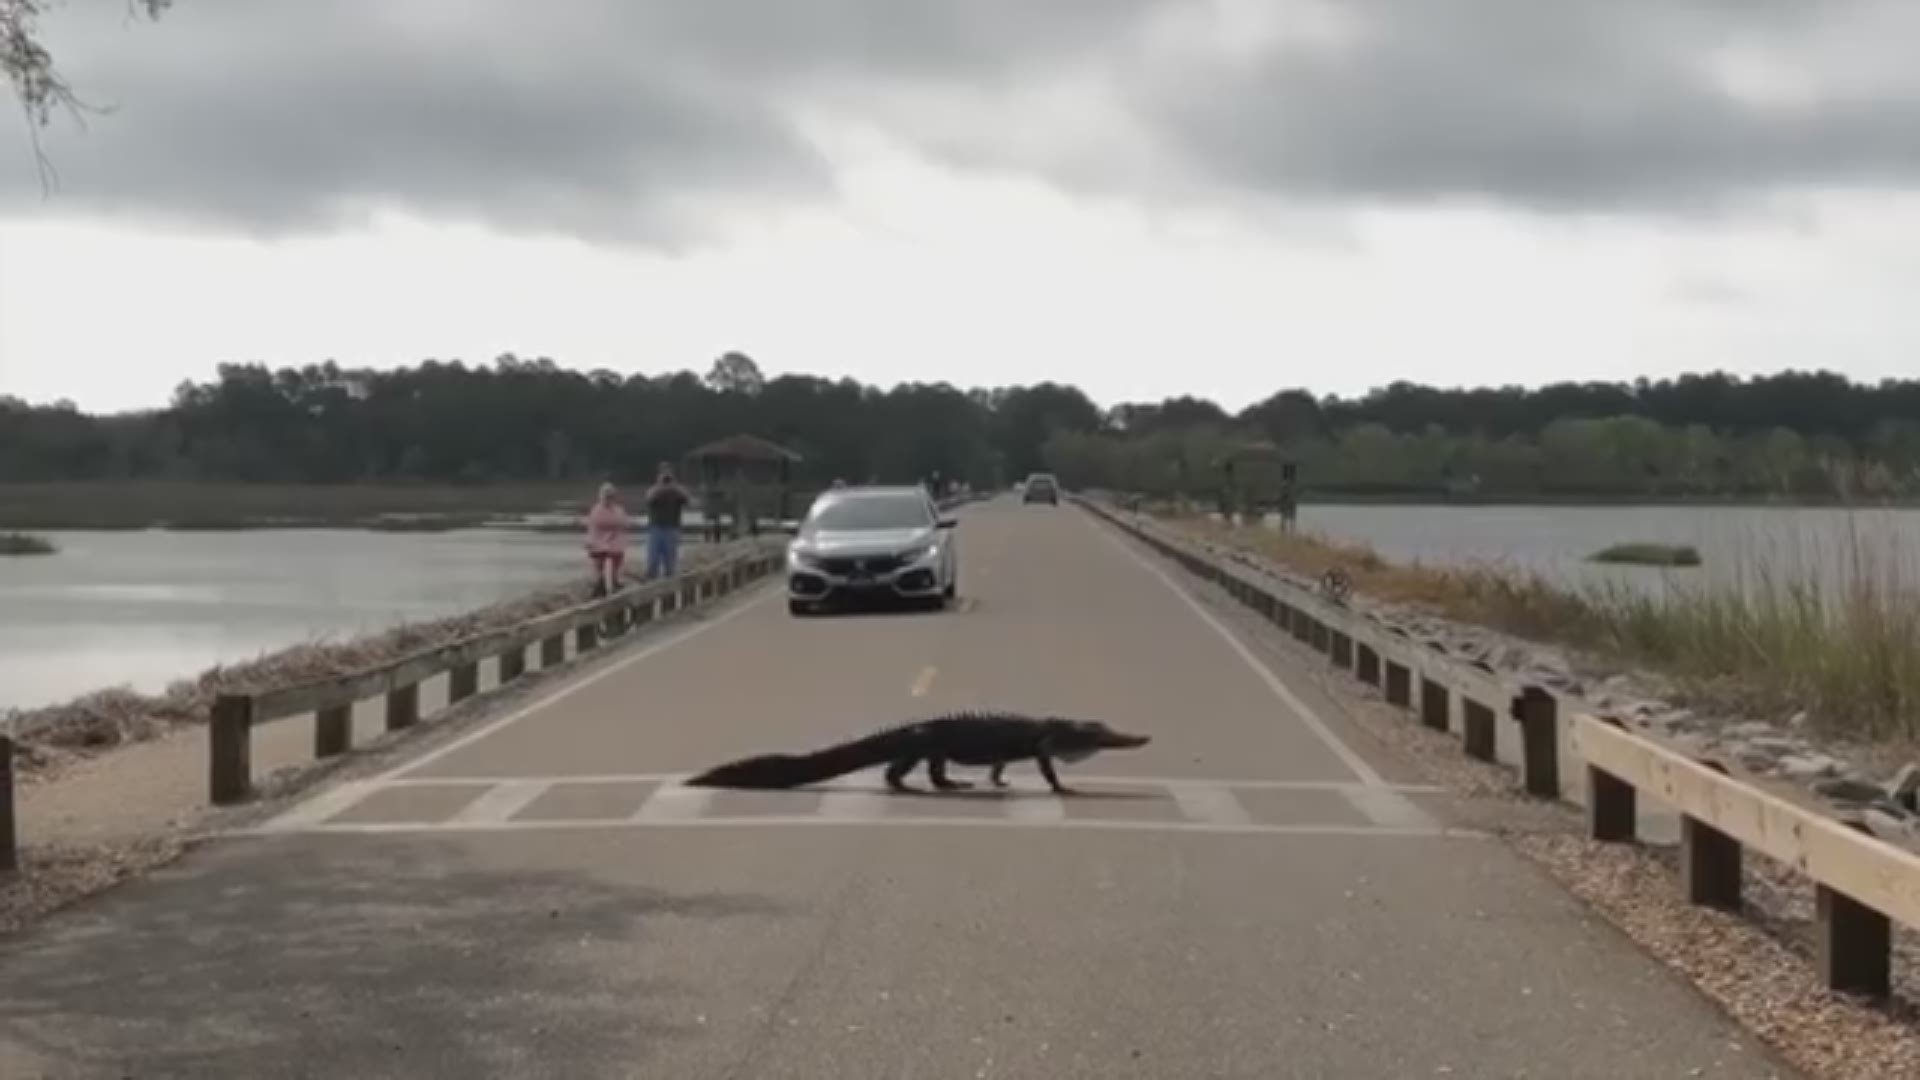 Austin Bond took this video at Huntington Beach State Park in Murrells Inlet, S.C. "It's amazing how often the alligators use the crosswalks when crossing!" he said.